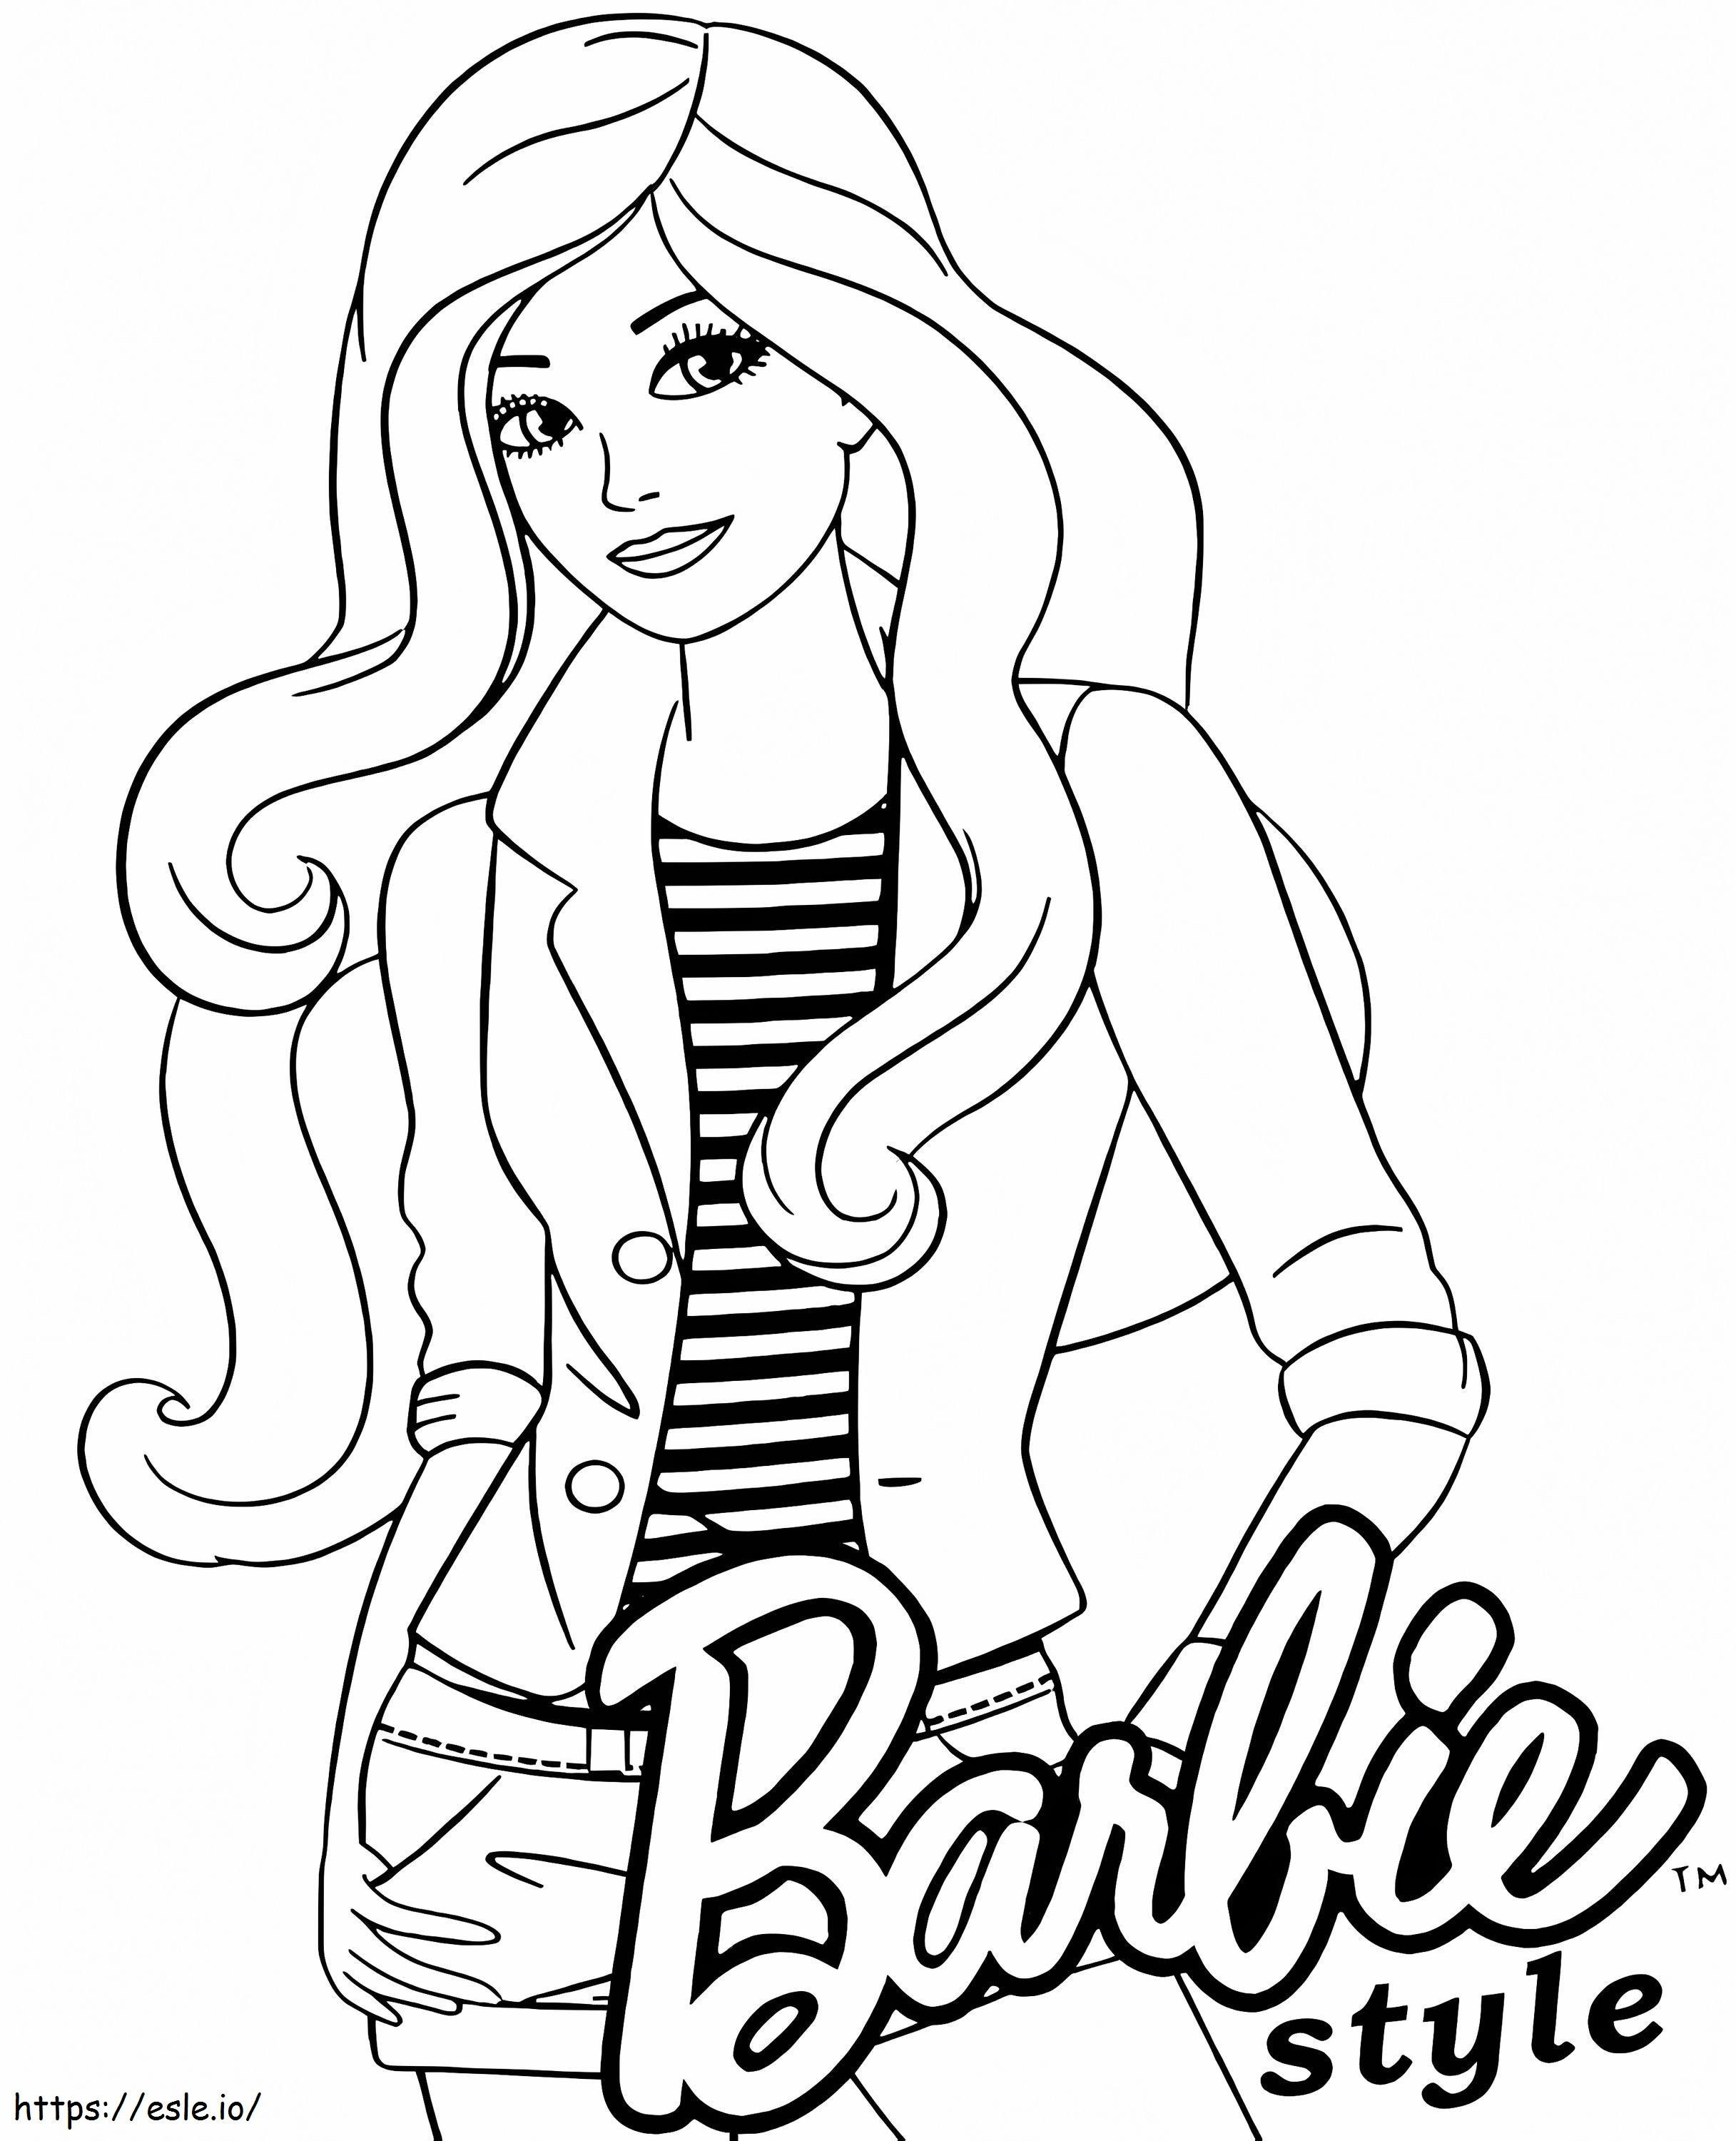 Barbie Style coloring page